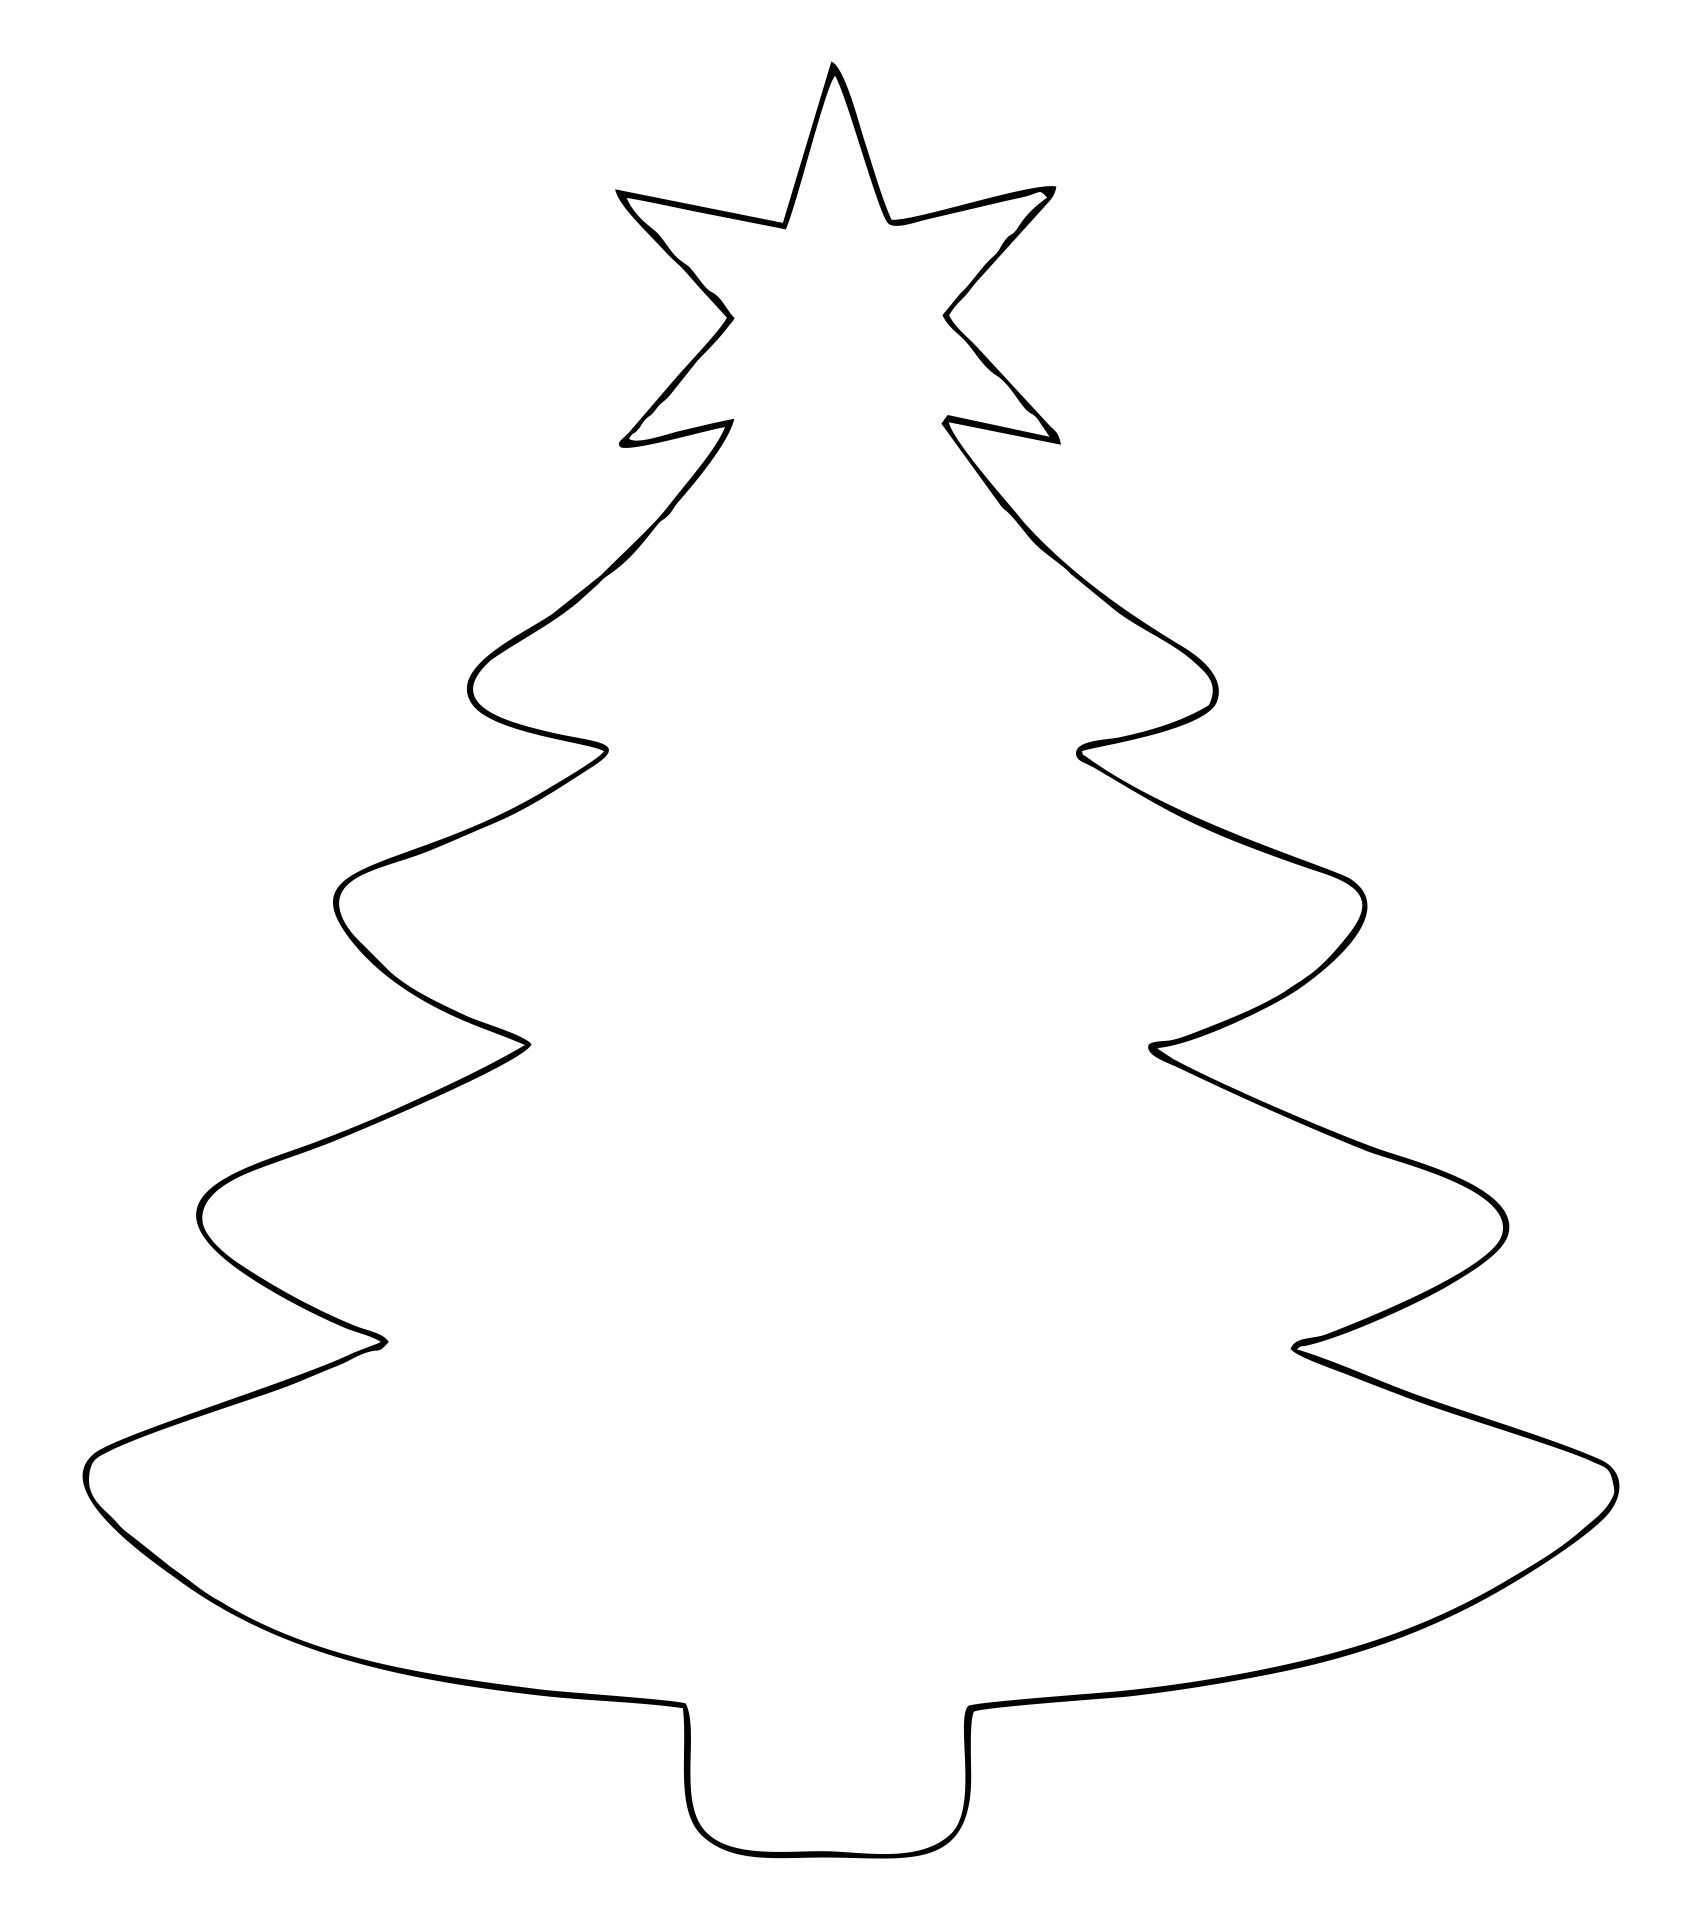 5-best-images-of-christmas-tree-cutouts-printable-free-printable-christmas-tree-decorations